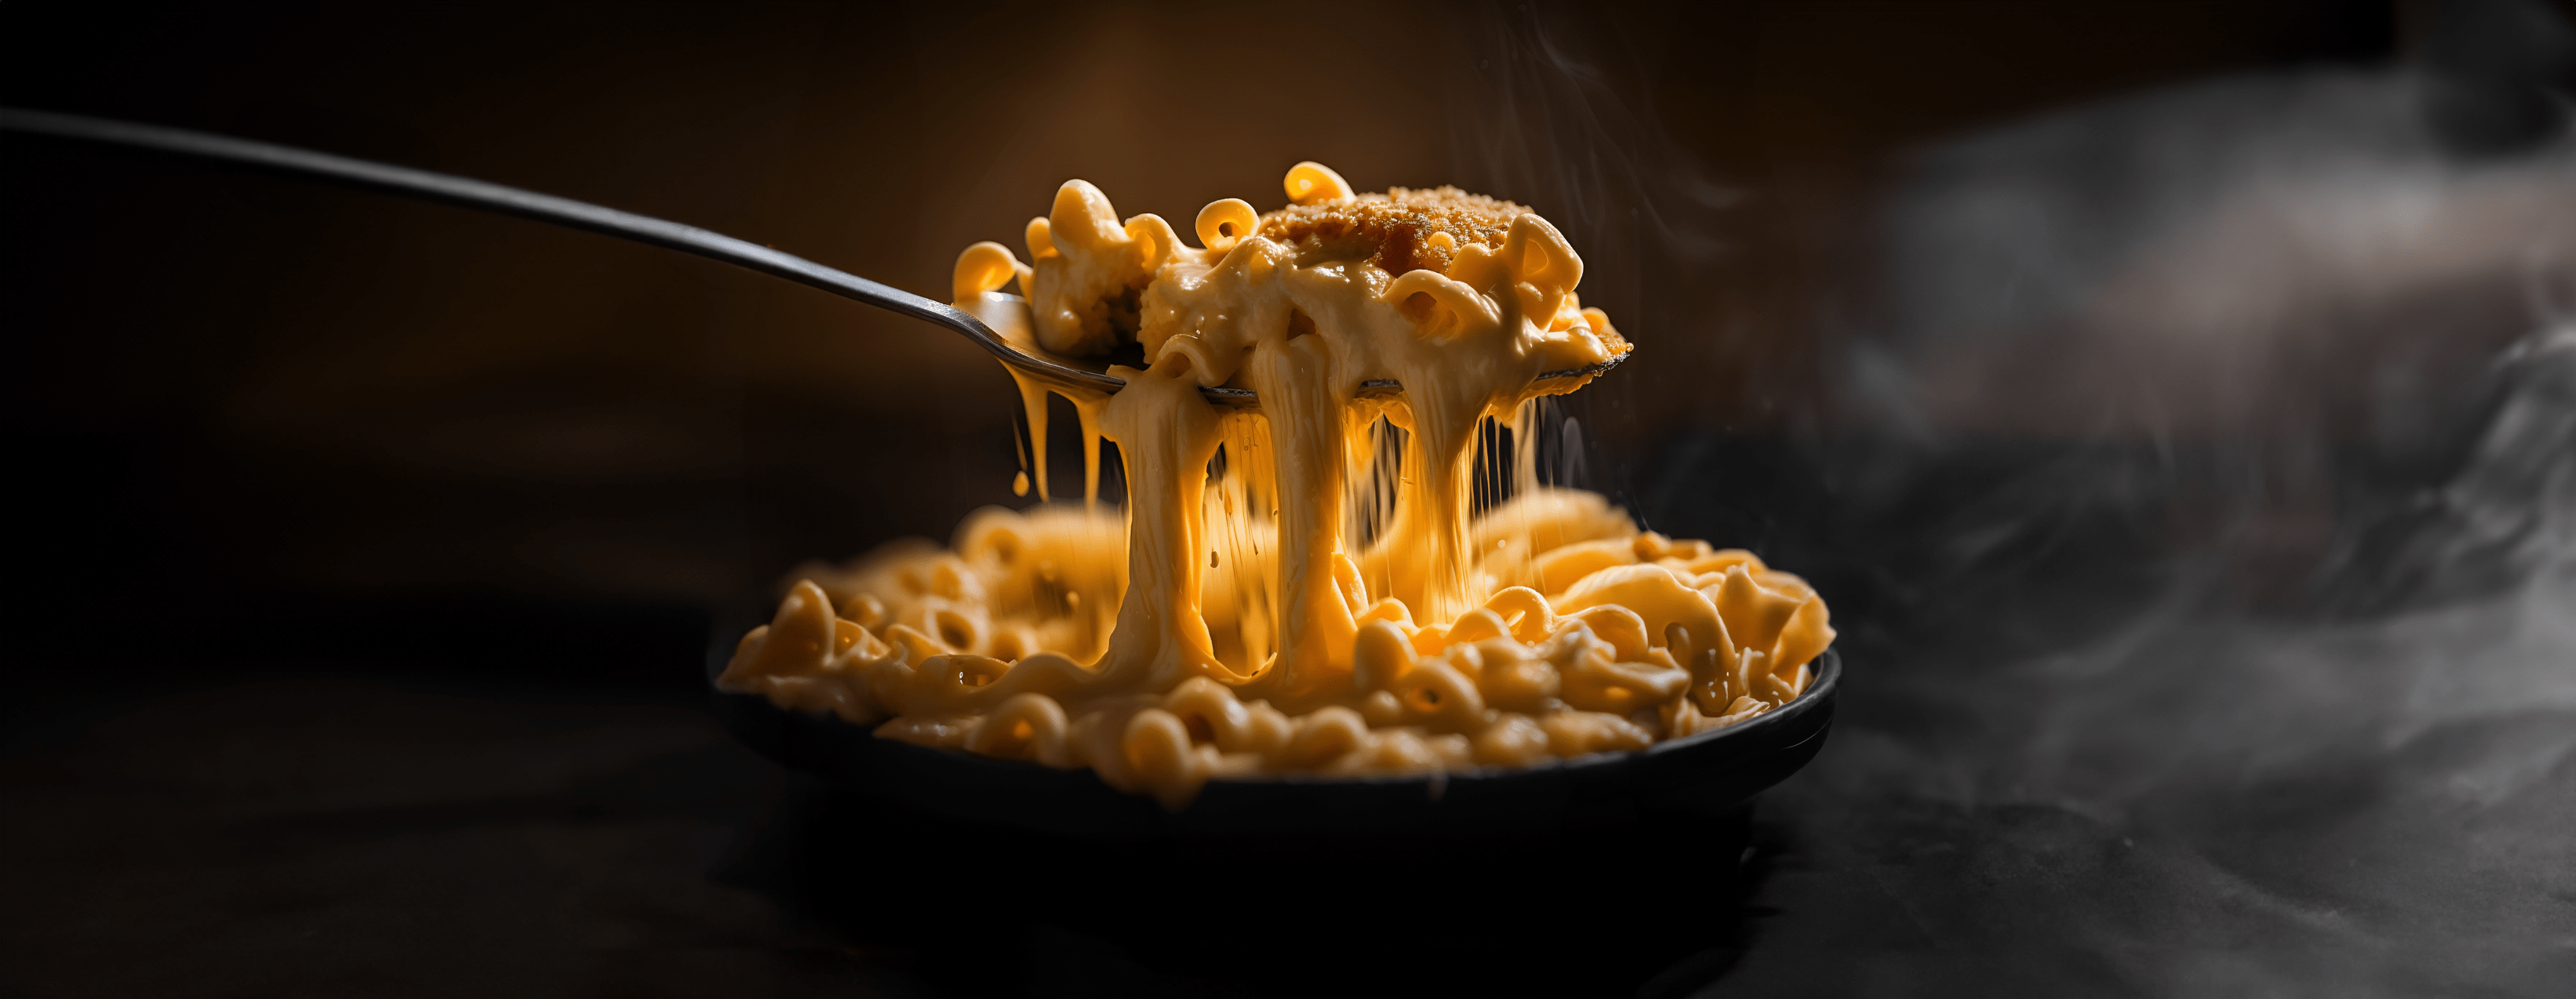 Macaroni and cheese for lactose intolerance